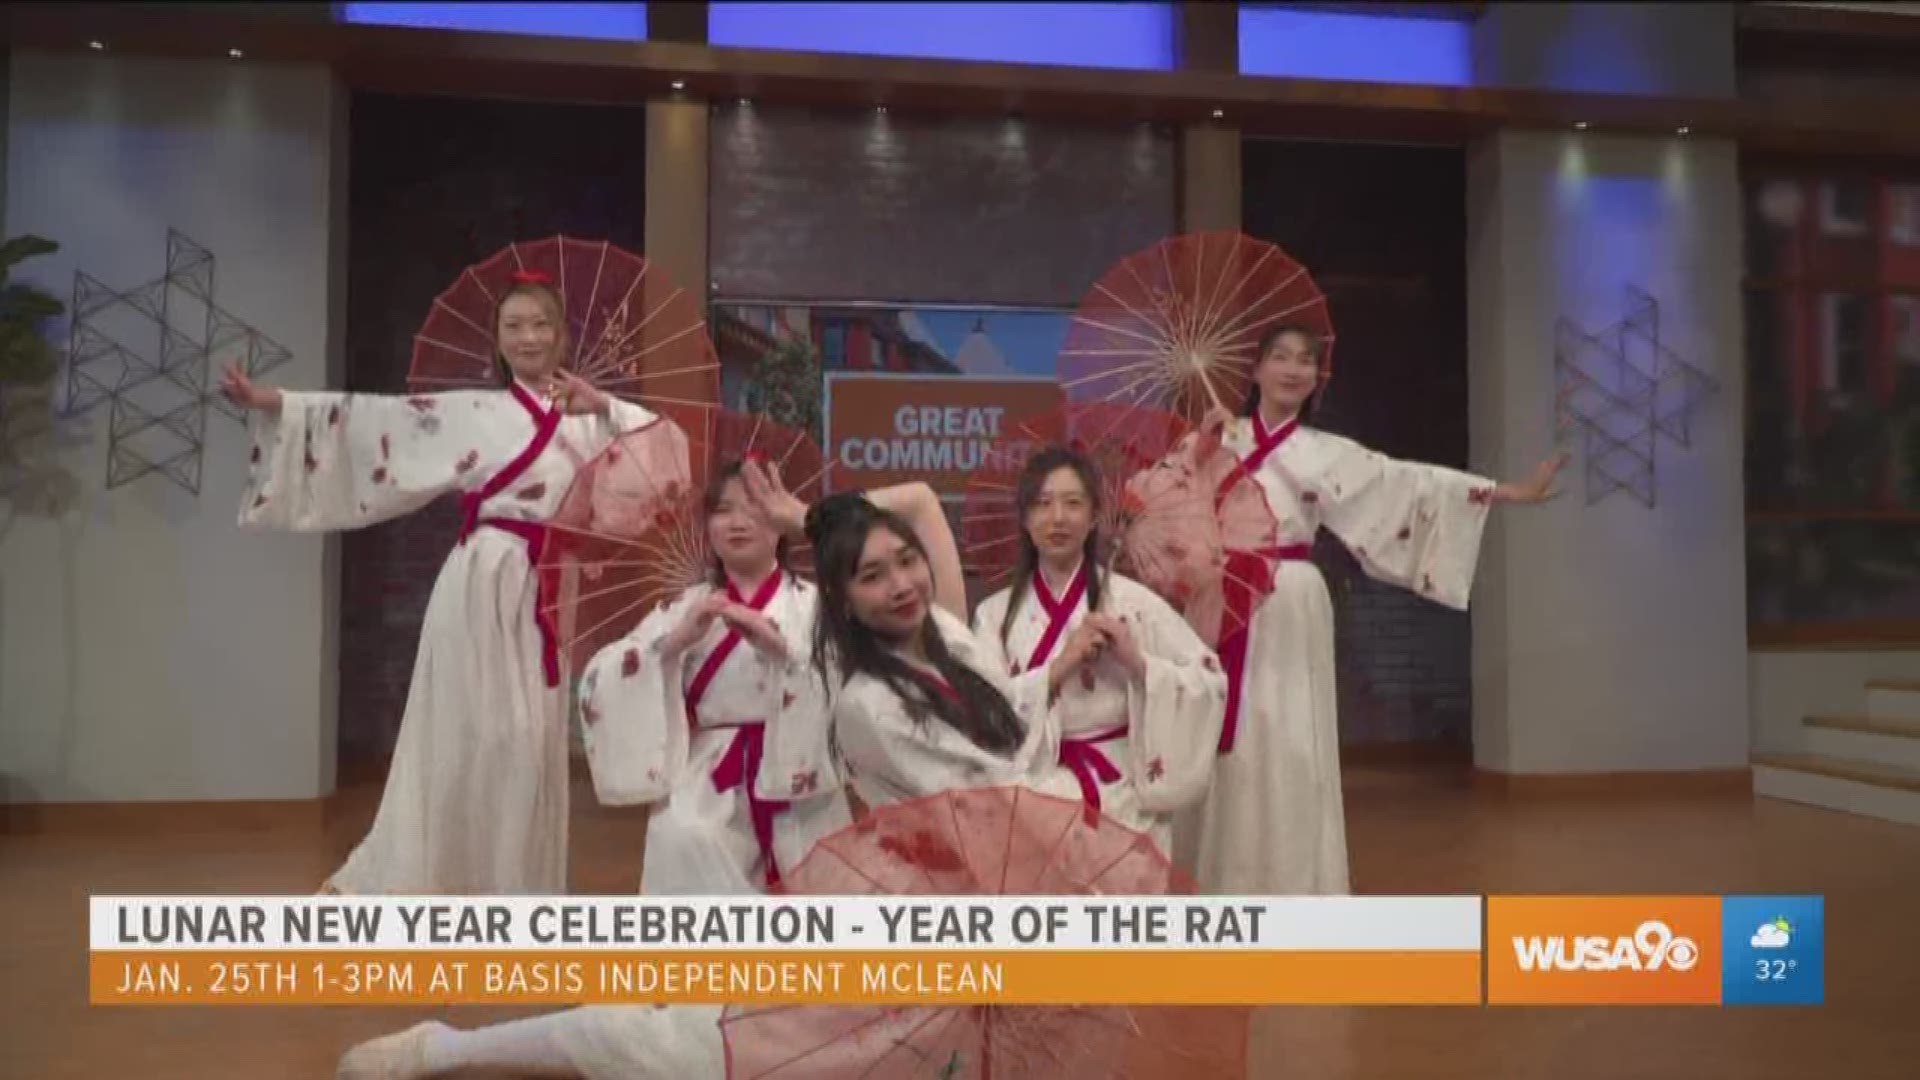 Basis Independent McLean is performing a special Chinese Lunar New Year this Saturday, January 25, 2020 from 1pm - 2pm on their campus.